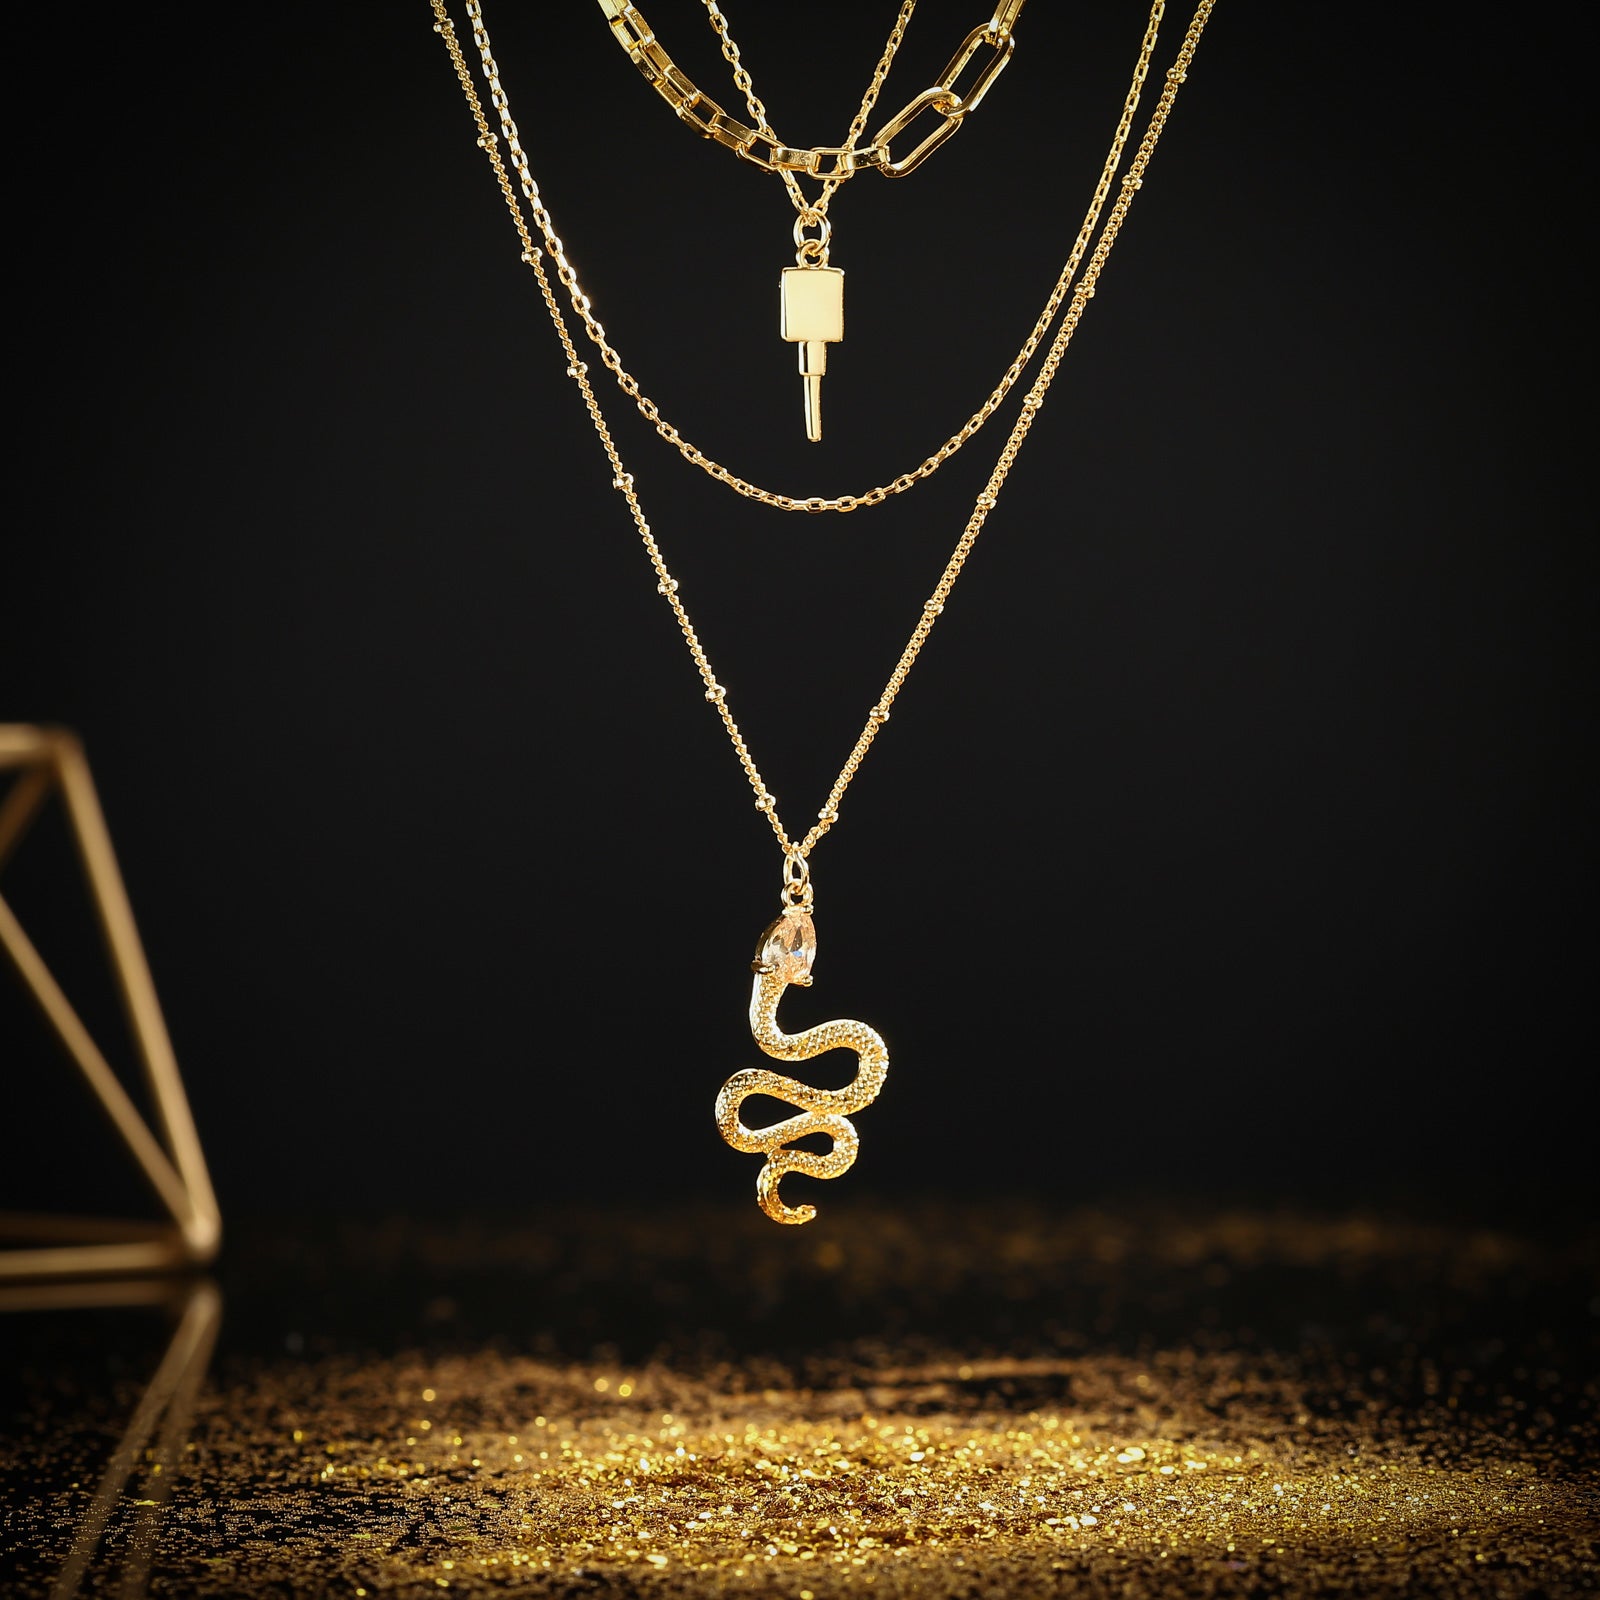 The Gate Of Hades Key 18k Gold Necklace